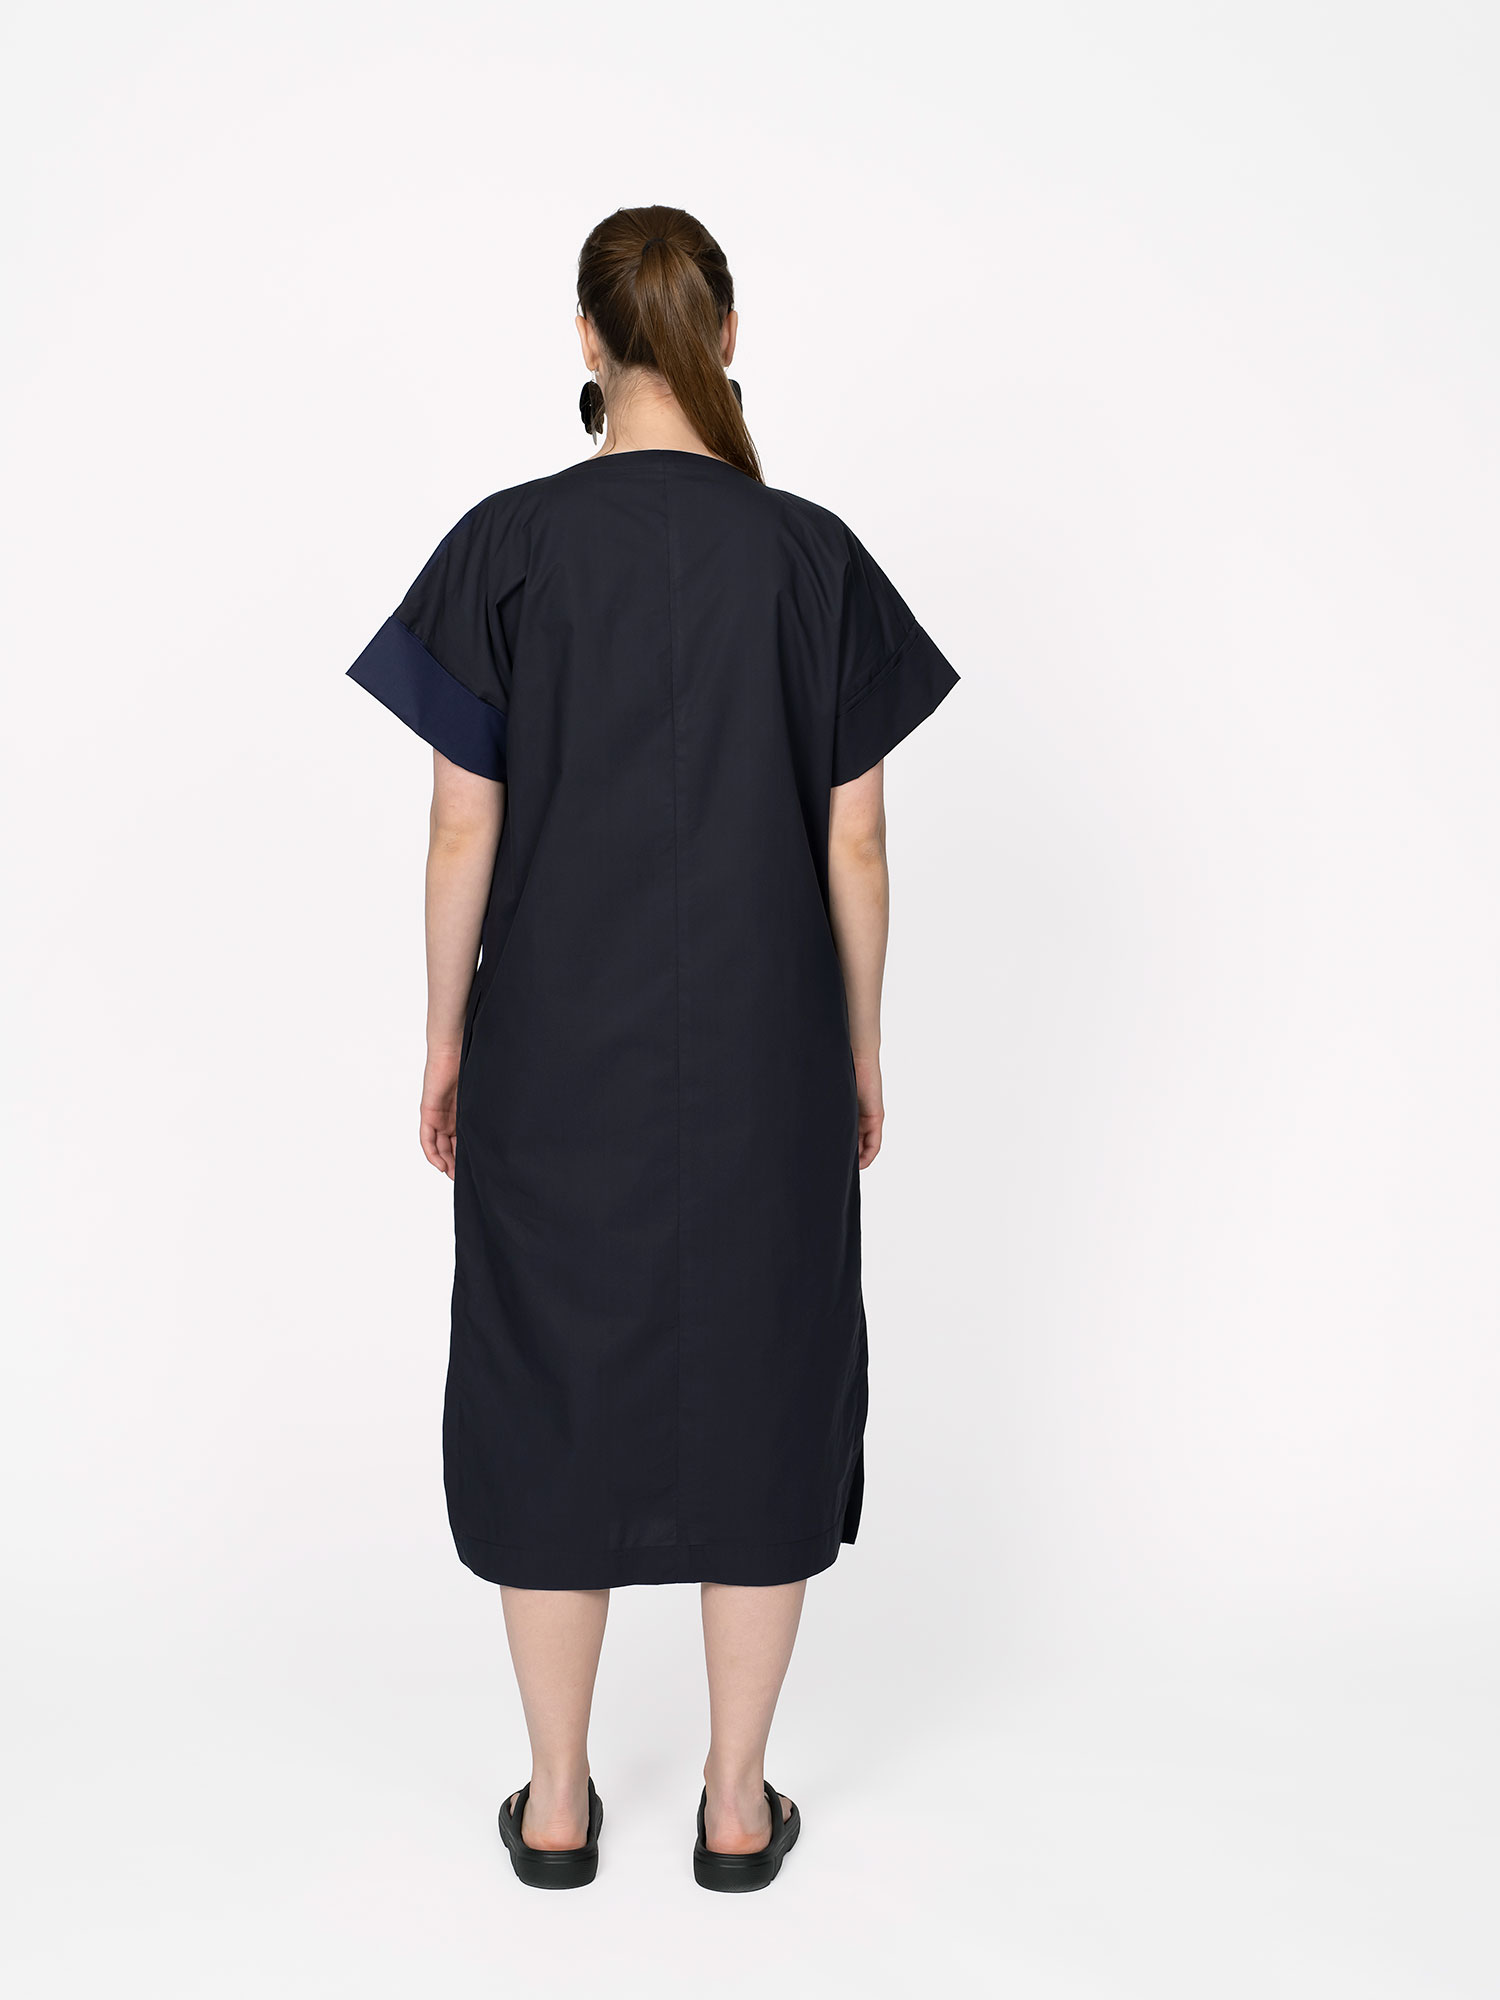 The Assembly Line Wrap Top - The Fold Line